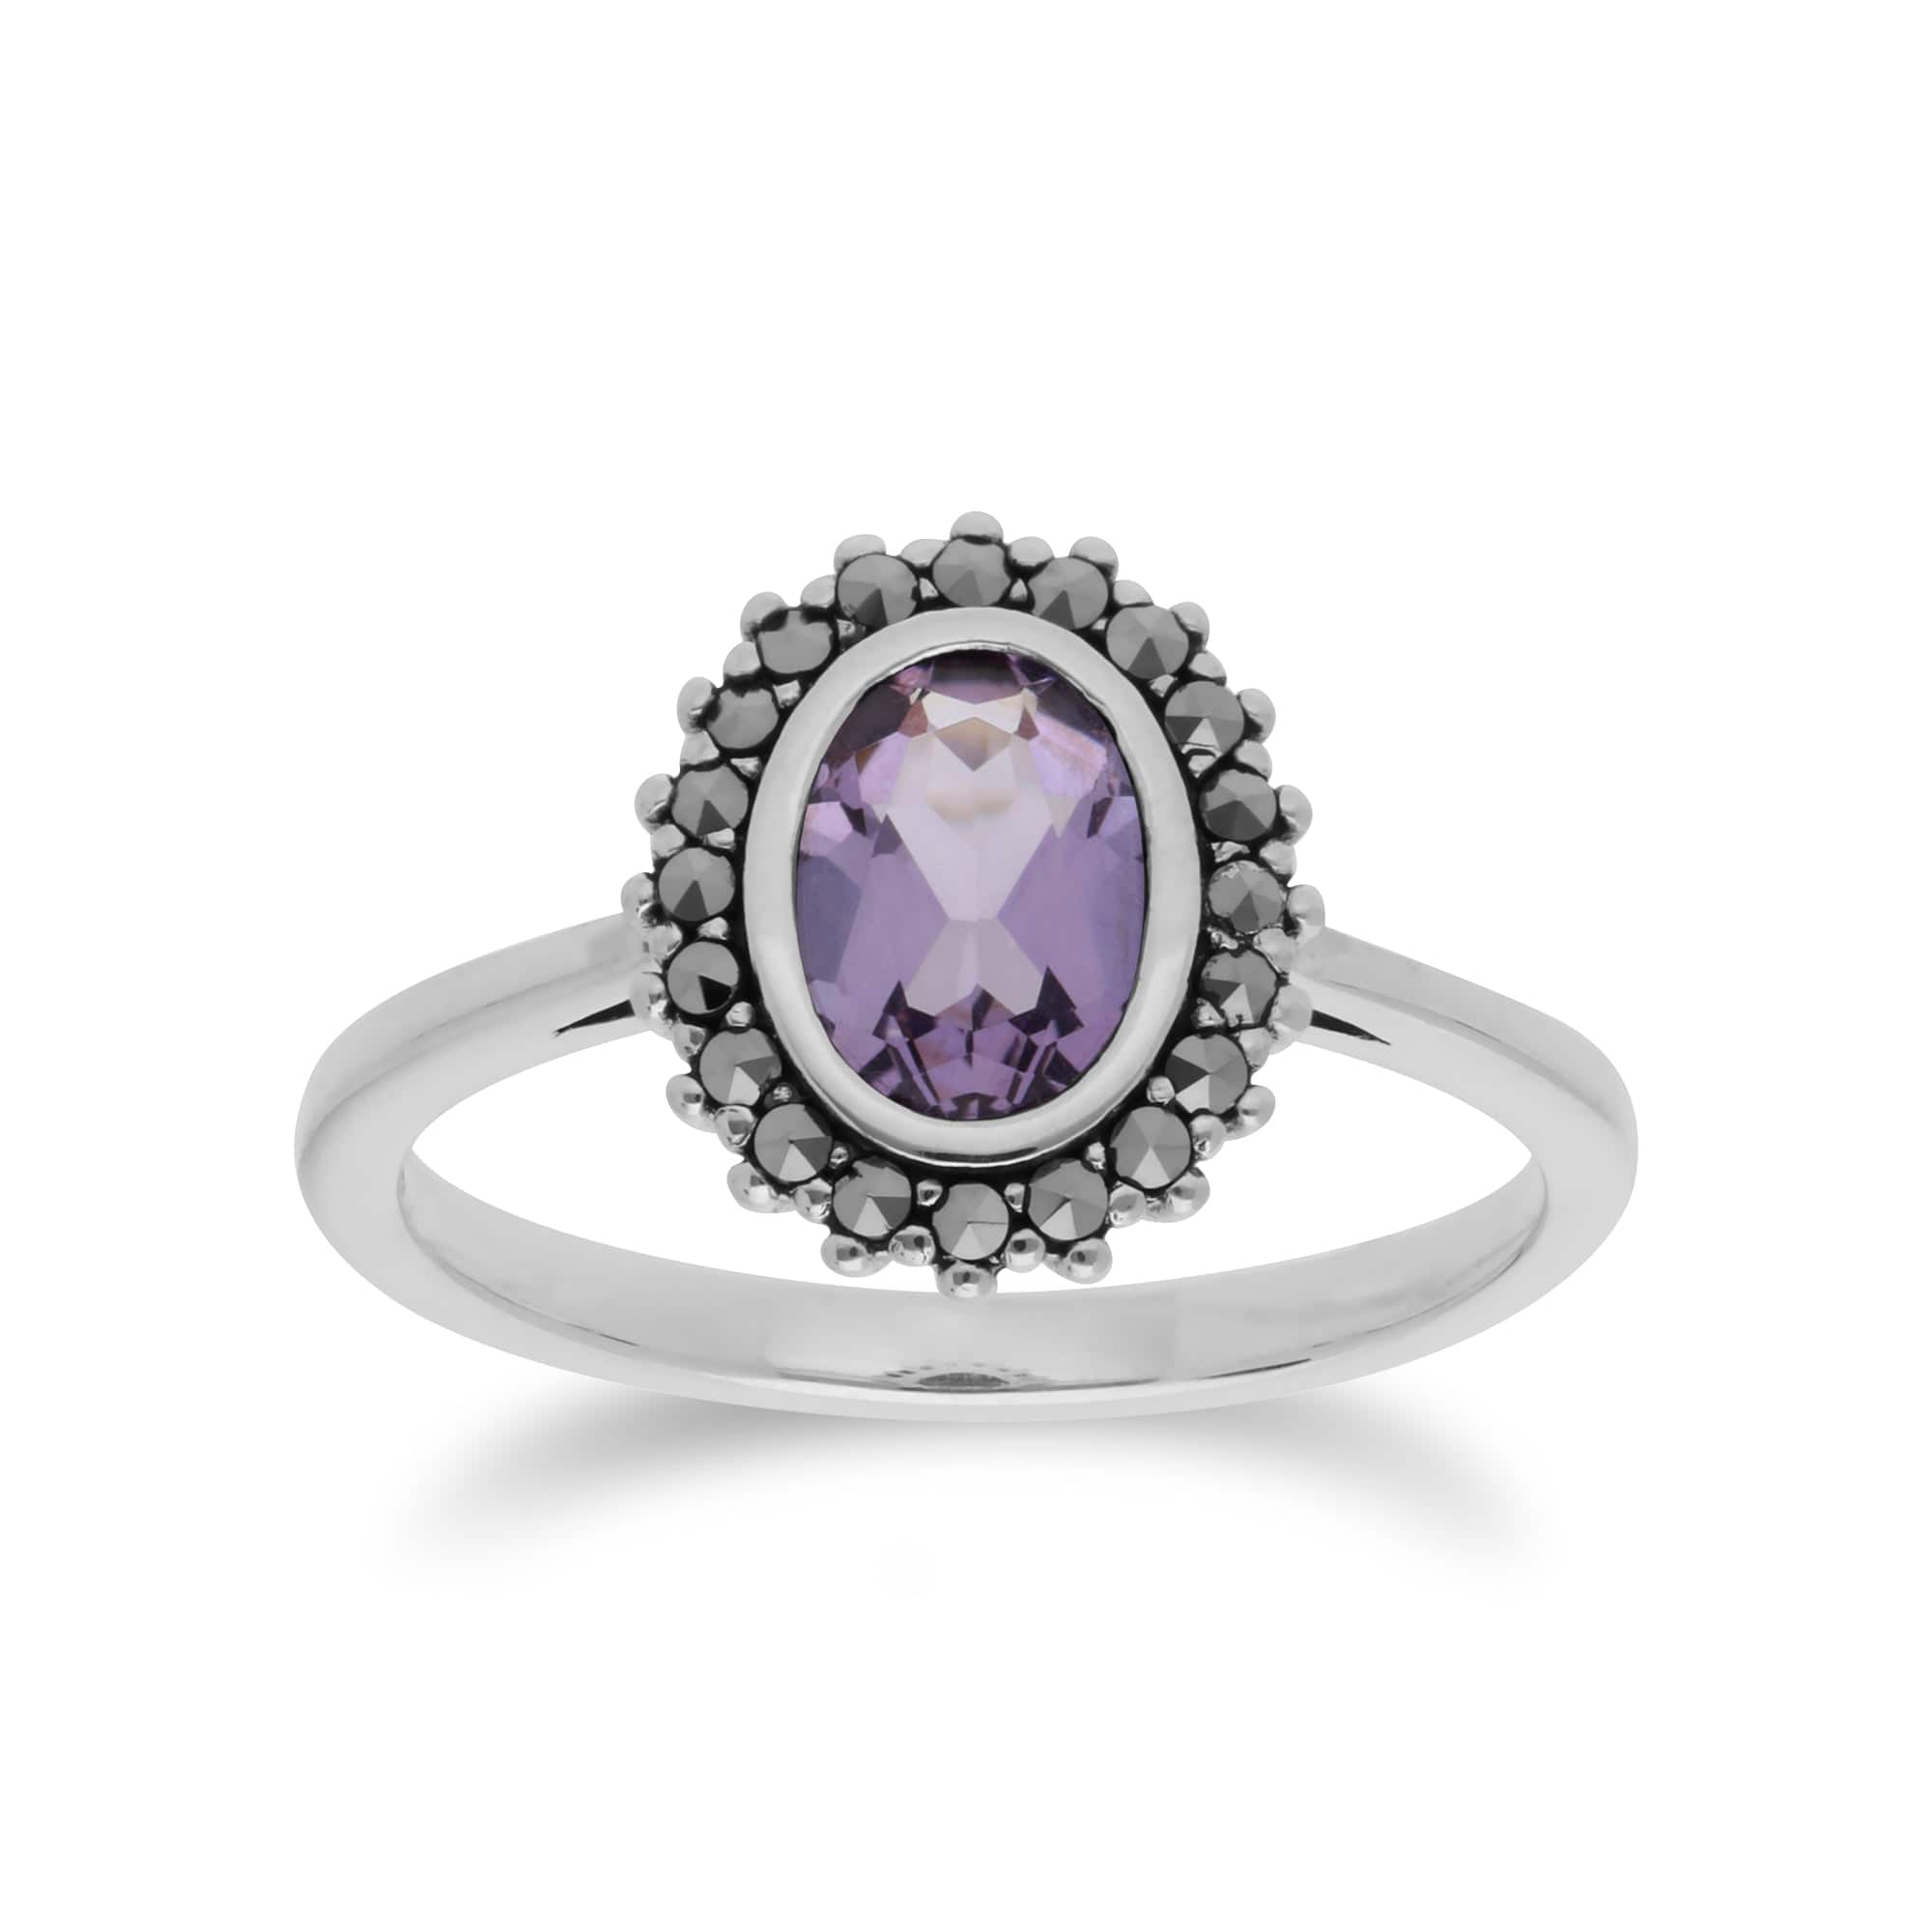 214R599702925 Art Deco Style Oval Amethyst & Marcasite Halo Ring in 925 Sterling Silver 1